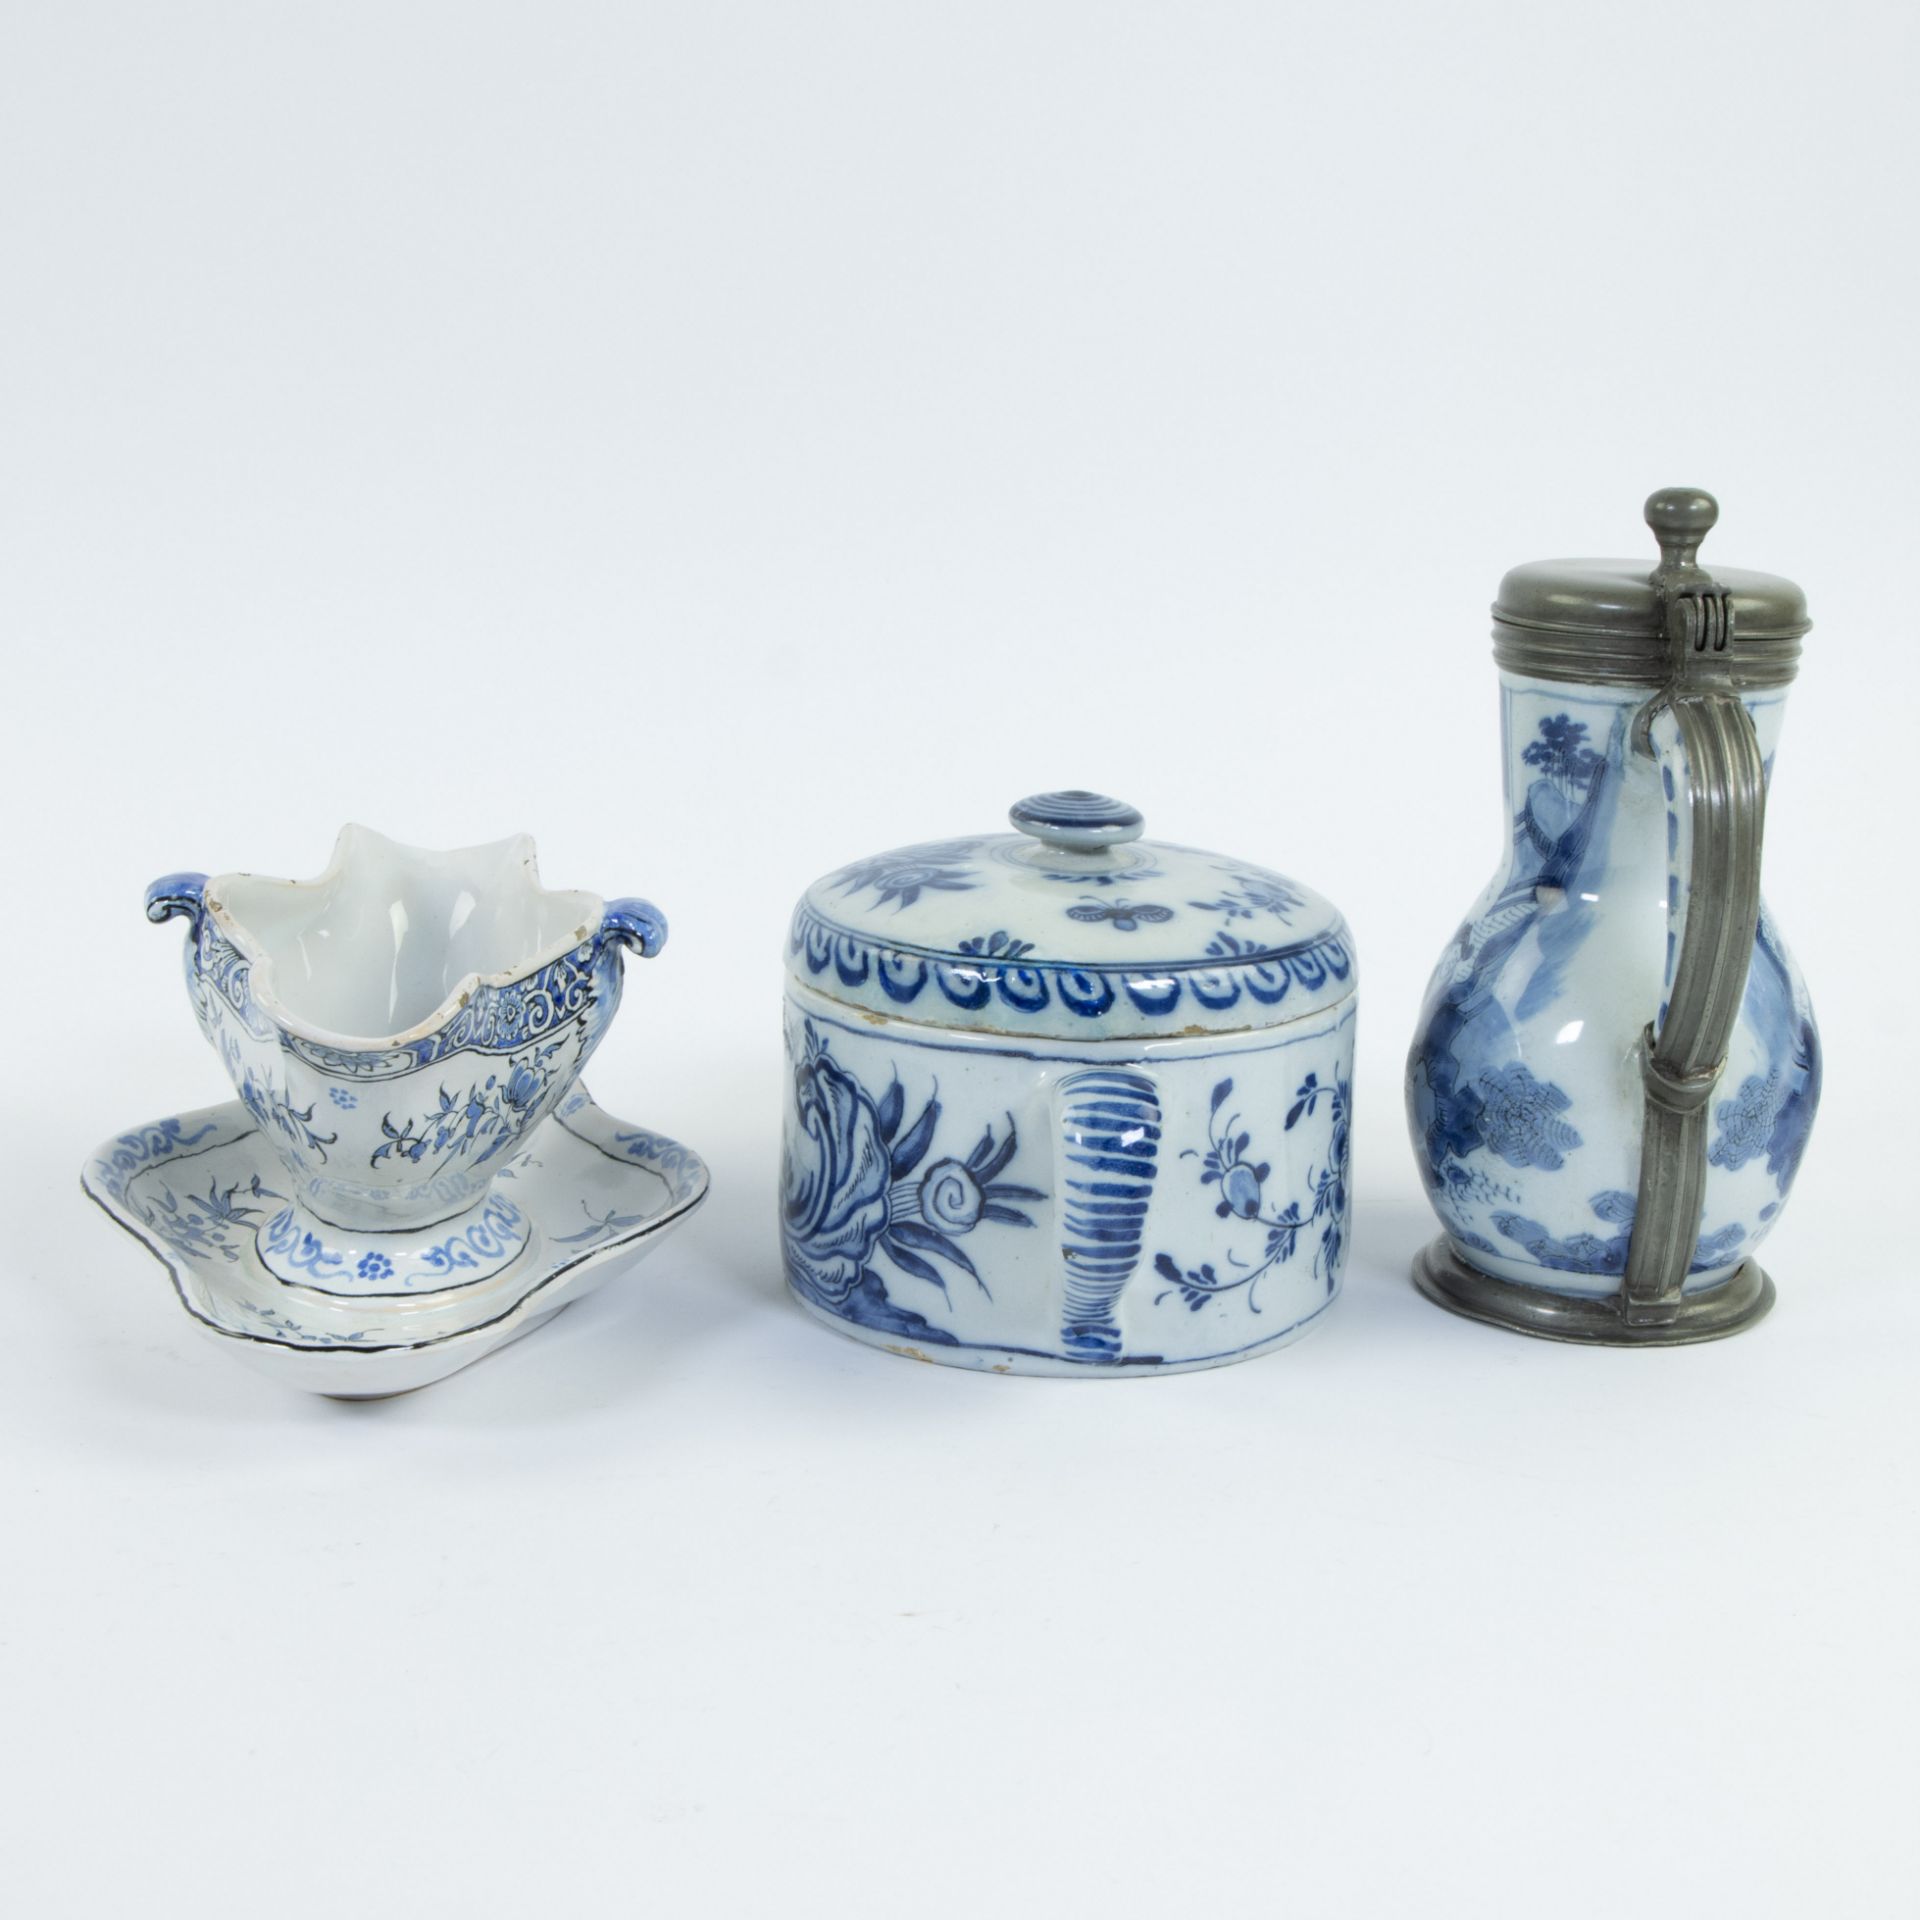 Lot Delft butter pot 18th century, jug circa 1700 and sauce bowl Lille 18th century - Image 4 of 5